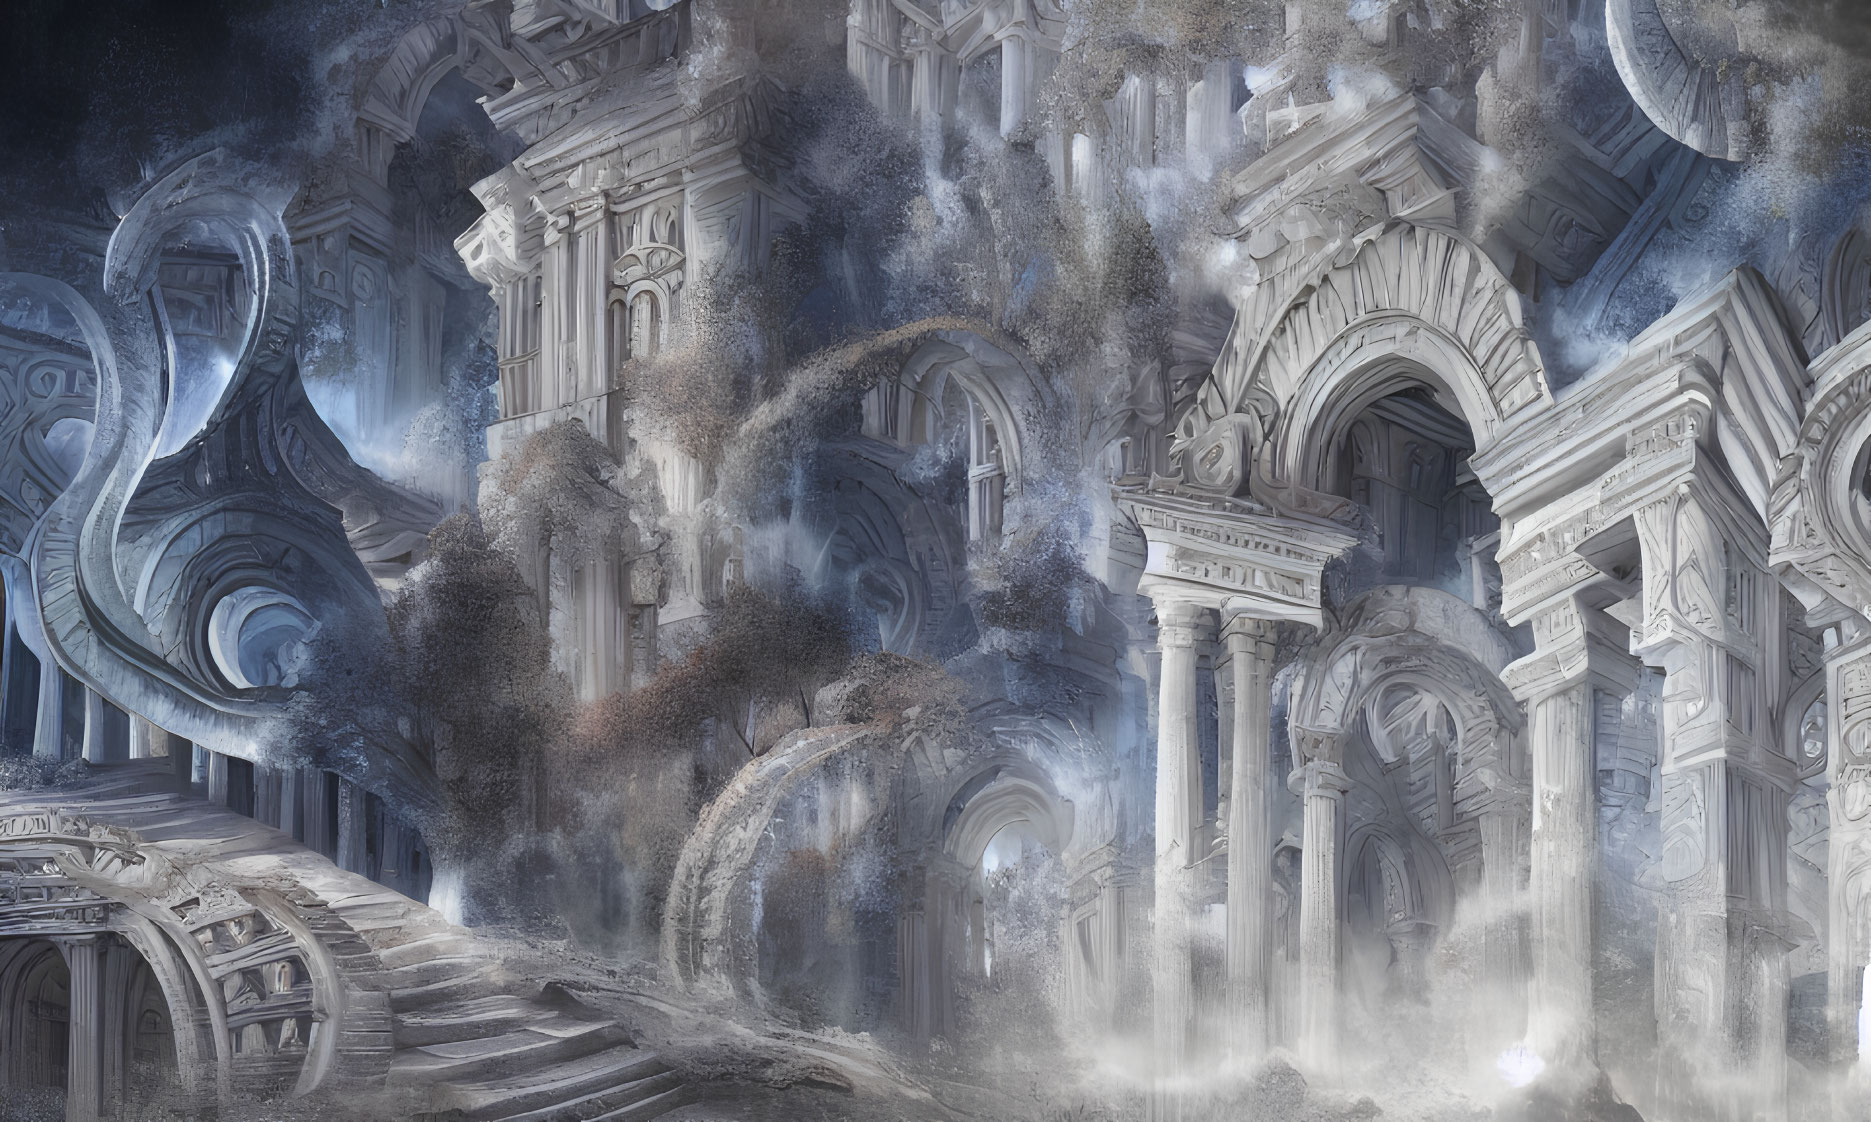 Detailed blue-toned illustration of ancient architecture with grand arches and swirling patterns in mist.